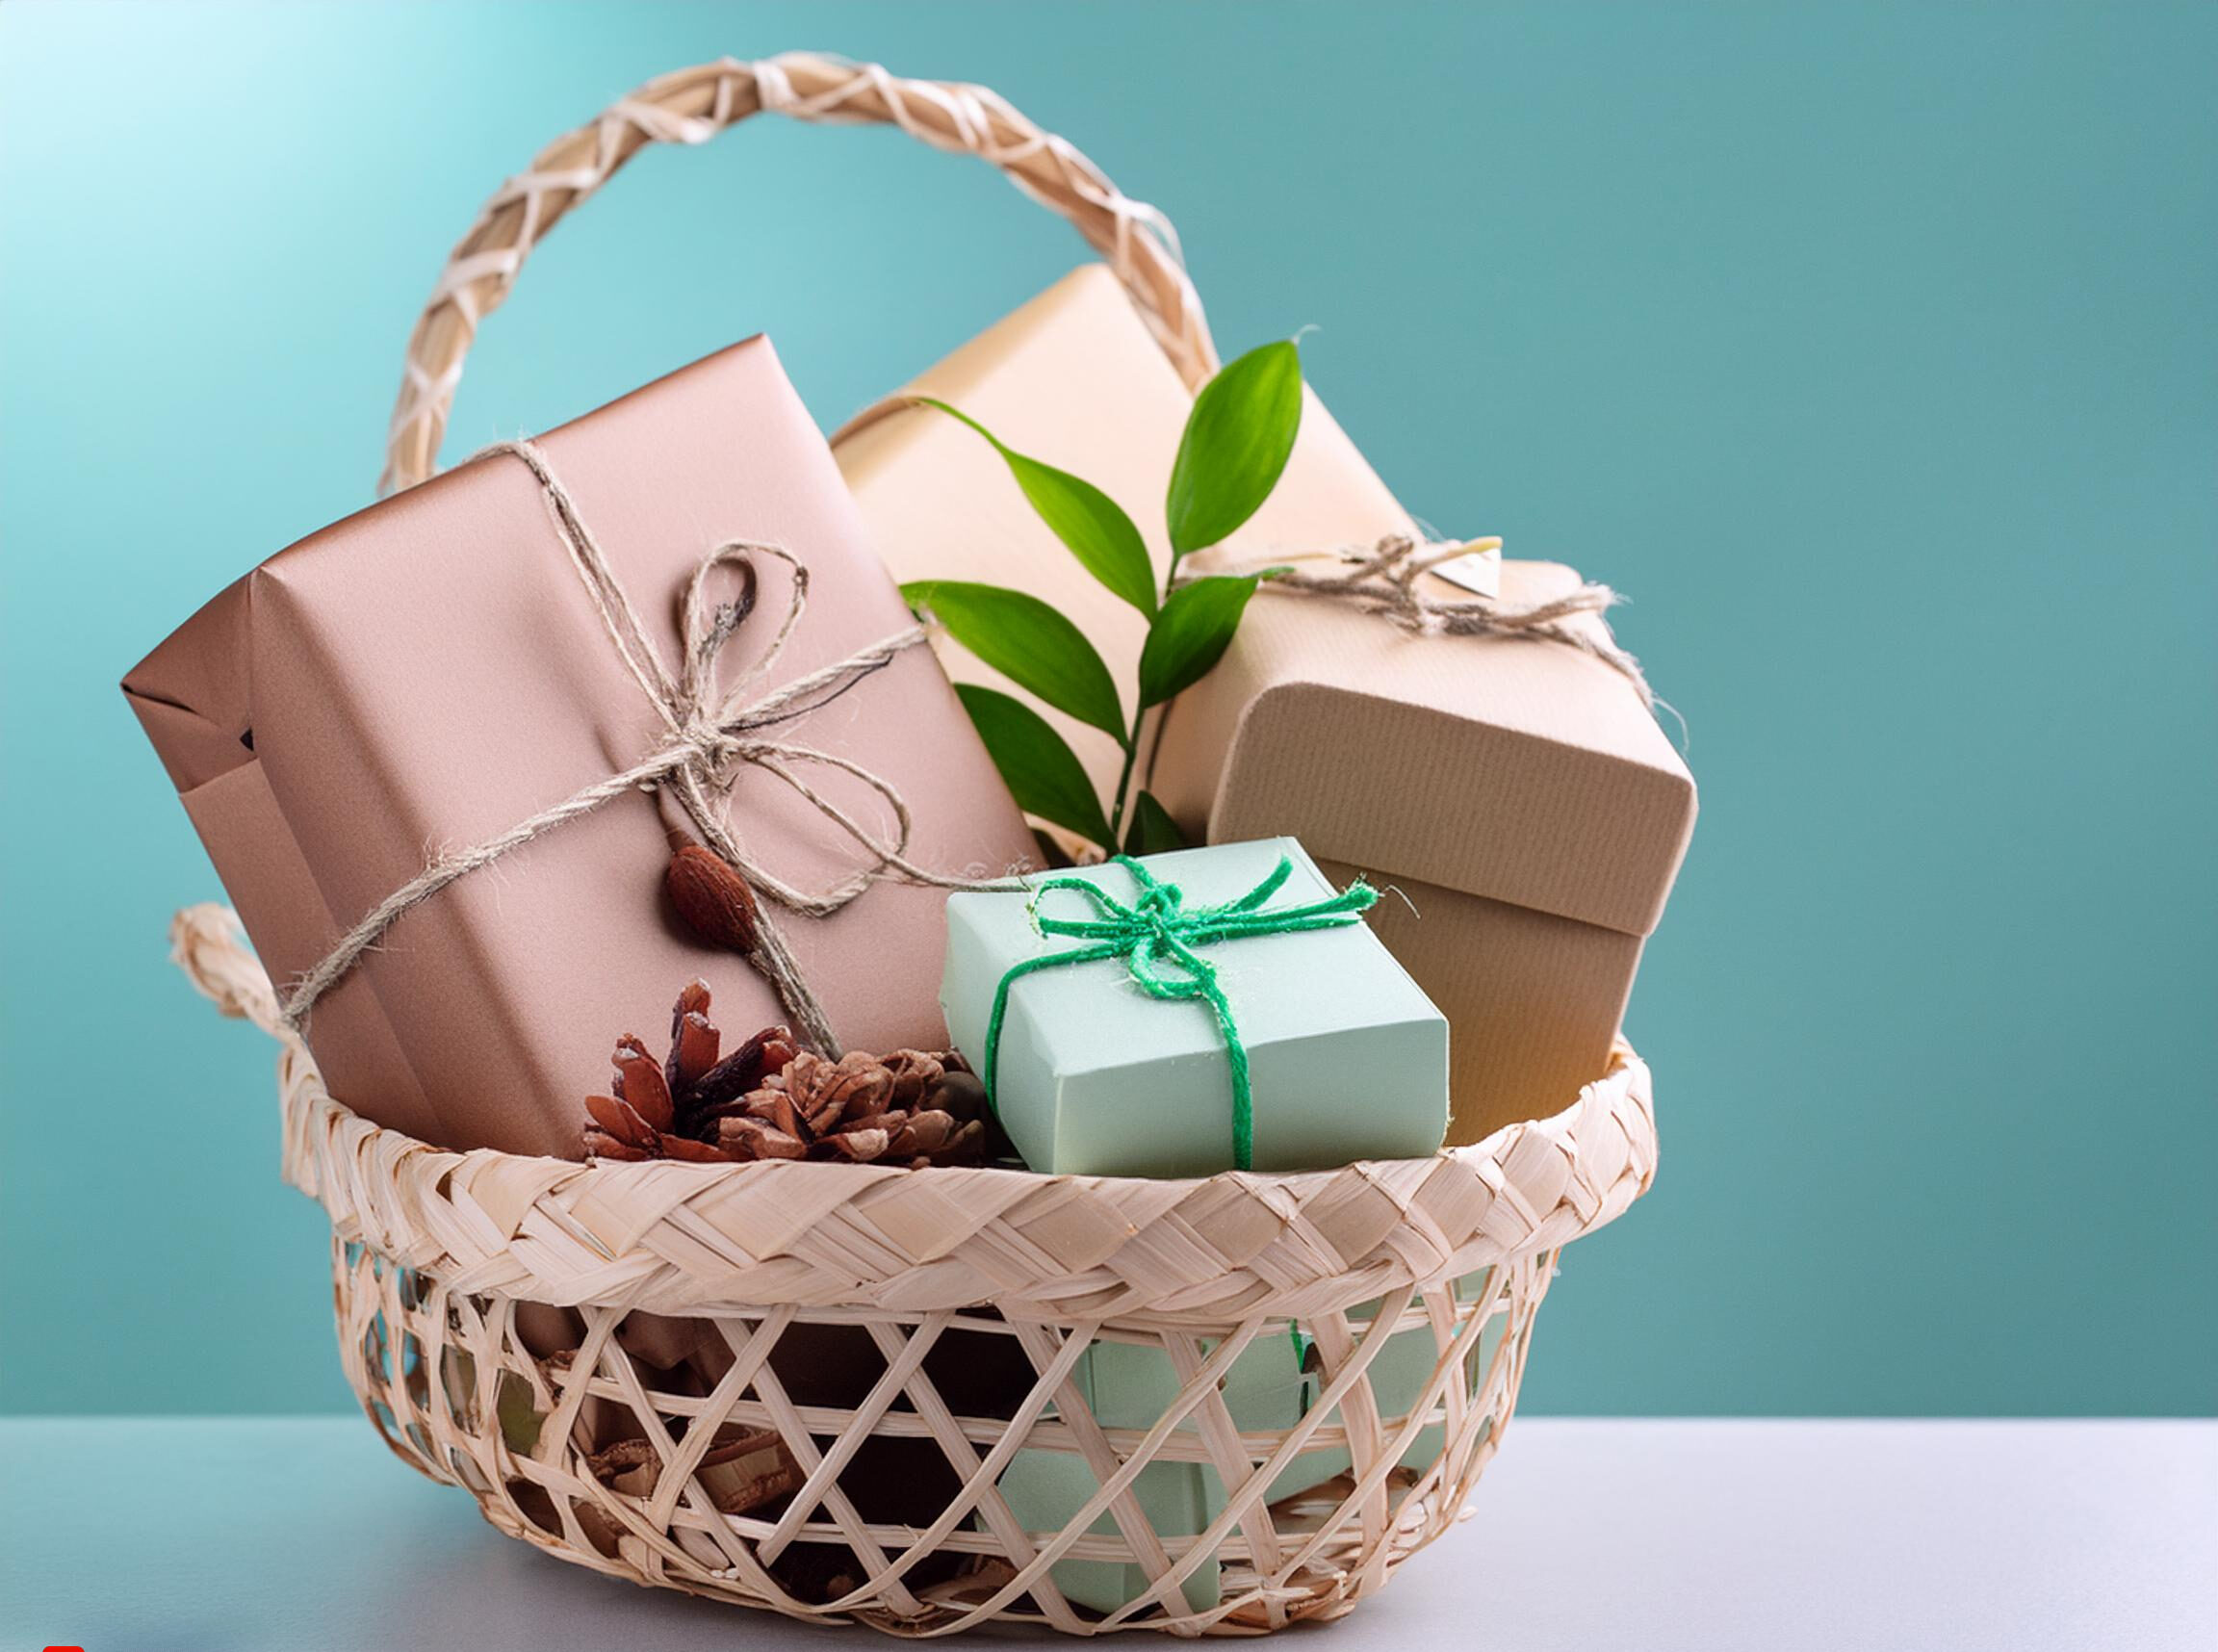 6 Creative Eco-Friendly Corporate Gift Ideas for Every Budget